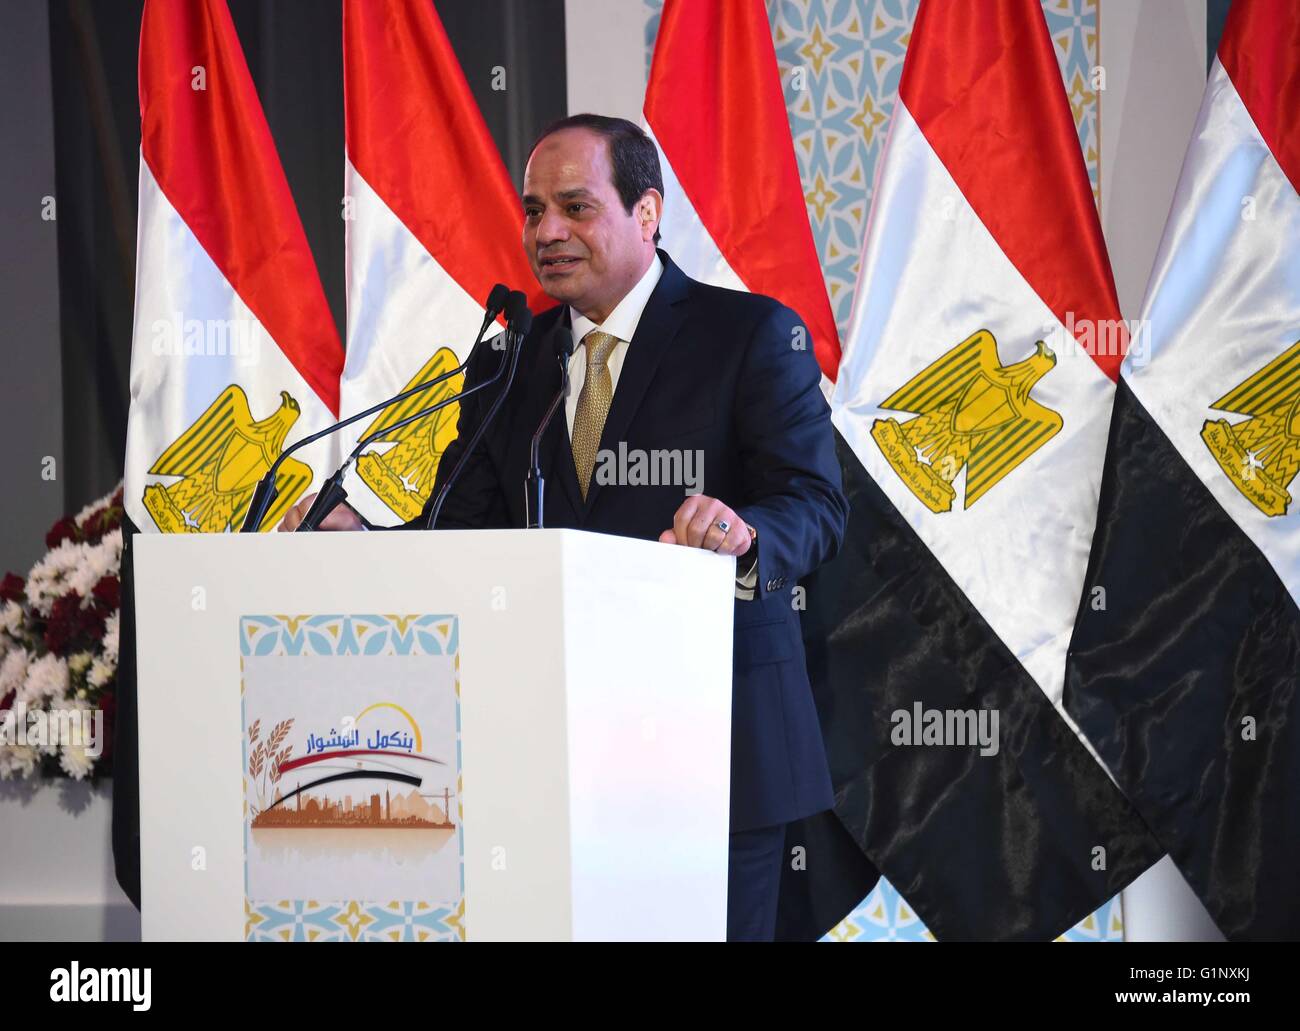 Cairo, Egypt. 17th May, 2016. Egyptian President Abdel-Fattah al-Sisi speaks while opening a power project in Assiut, Egypt, on May 17, 2016. Egyptian President said Tuesday that there is a 'real chance' to establish true peace between the conflicting Palestinian and Israeli sides if they can respond to Arab and international peacemaking efforts, official MENA news agency reported. © MENA/Xinhua/Alamy Live News Stock Photo